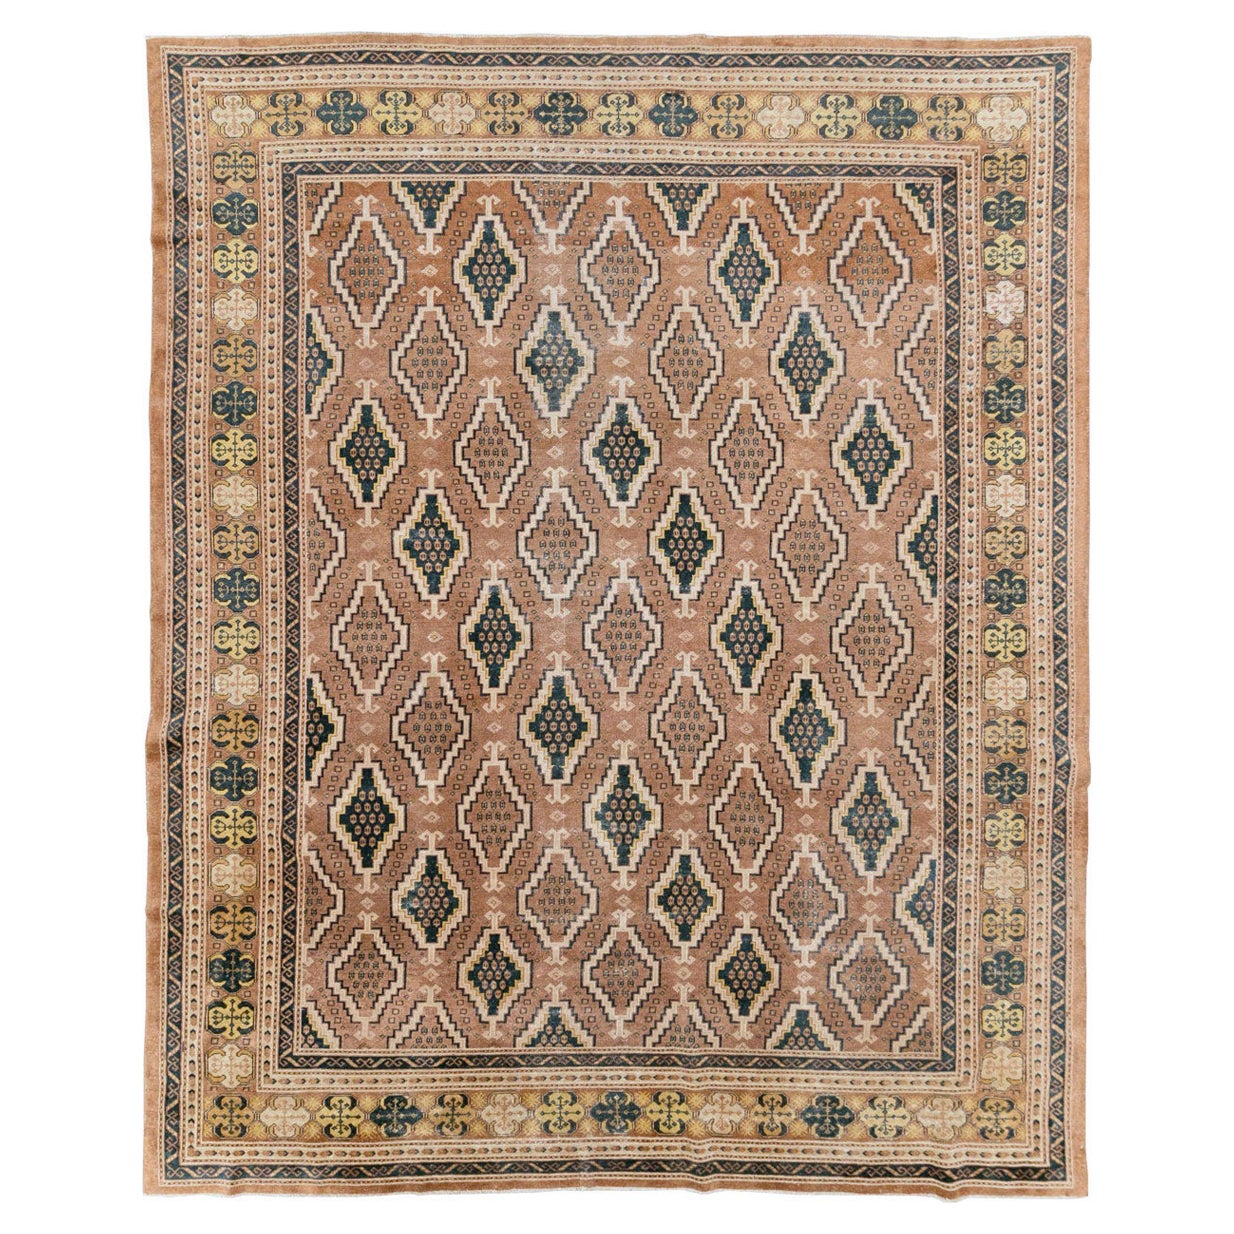 Early 20th Century Handmade Central Asian Samarkand Room Size Carpet For Sale